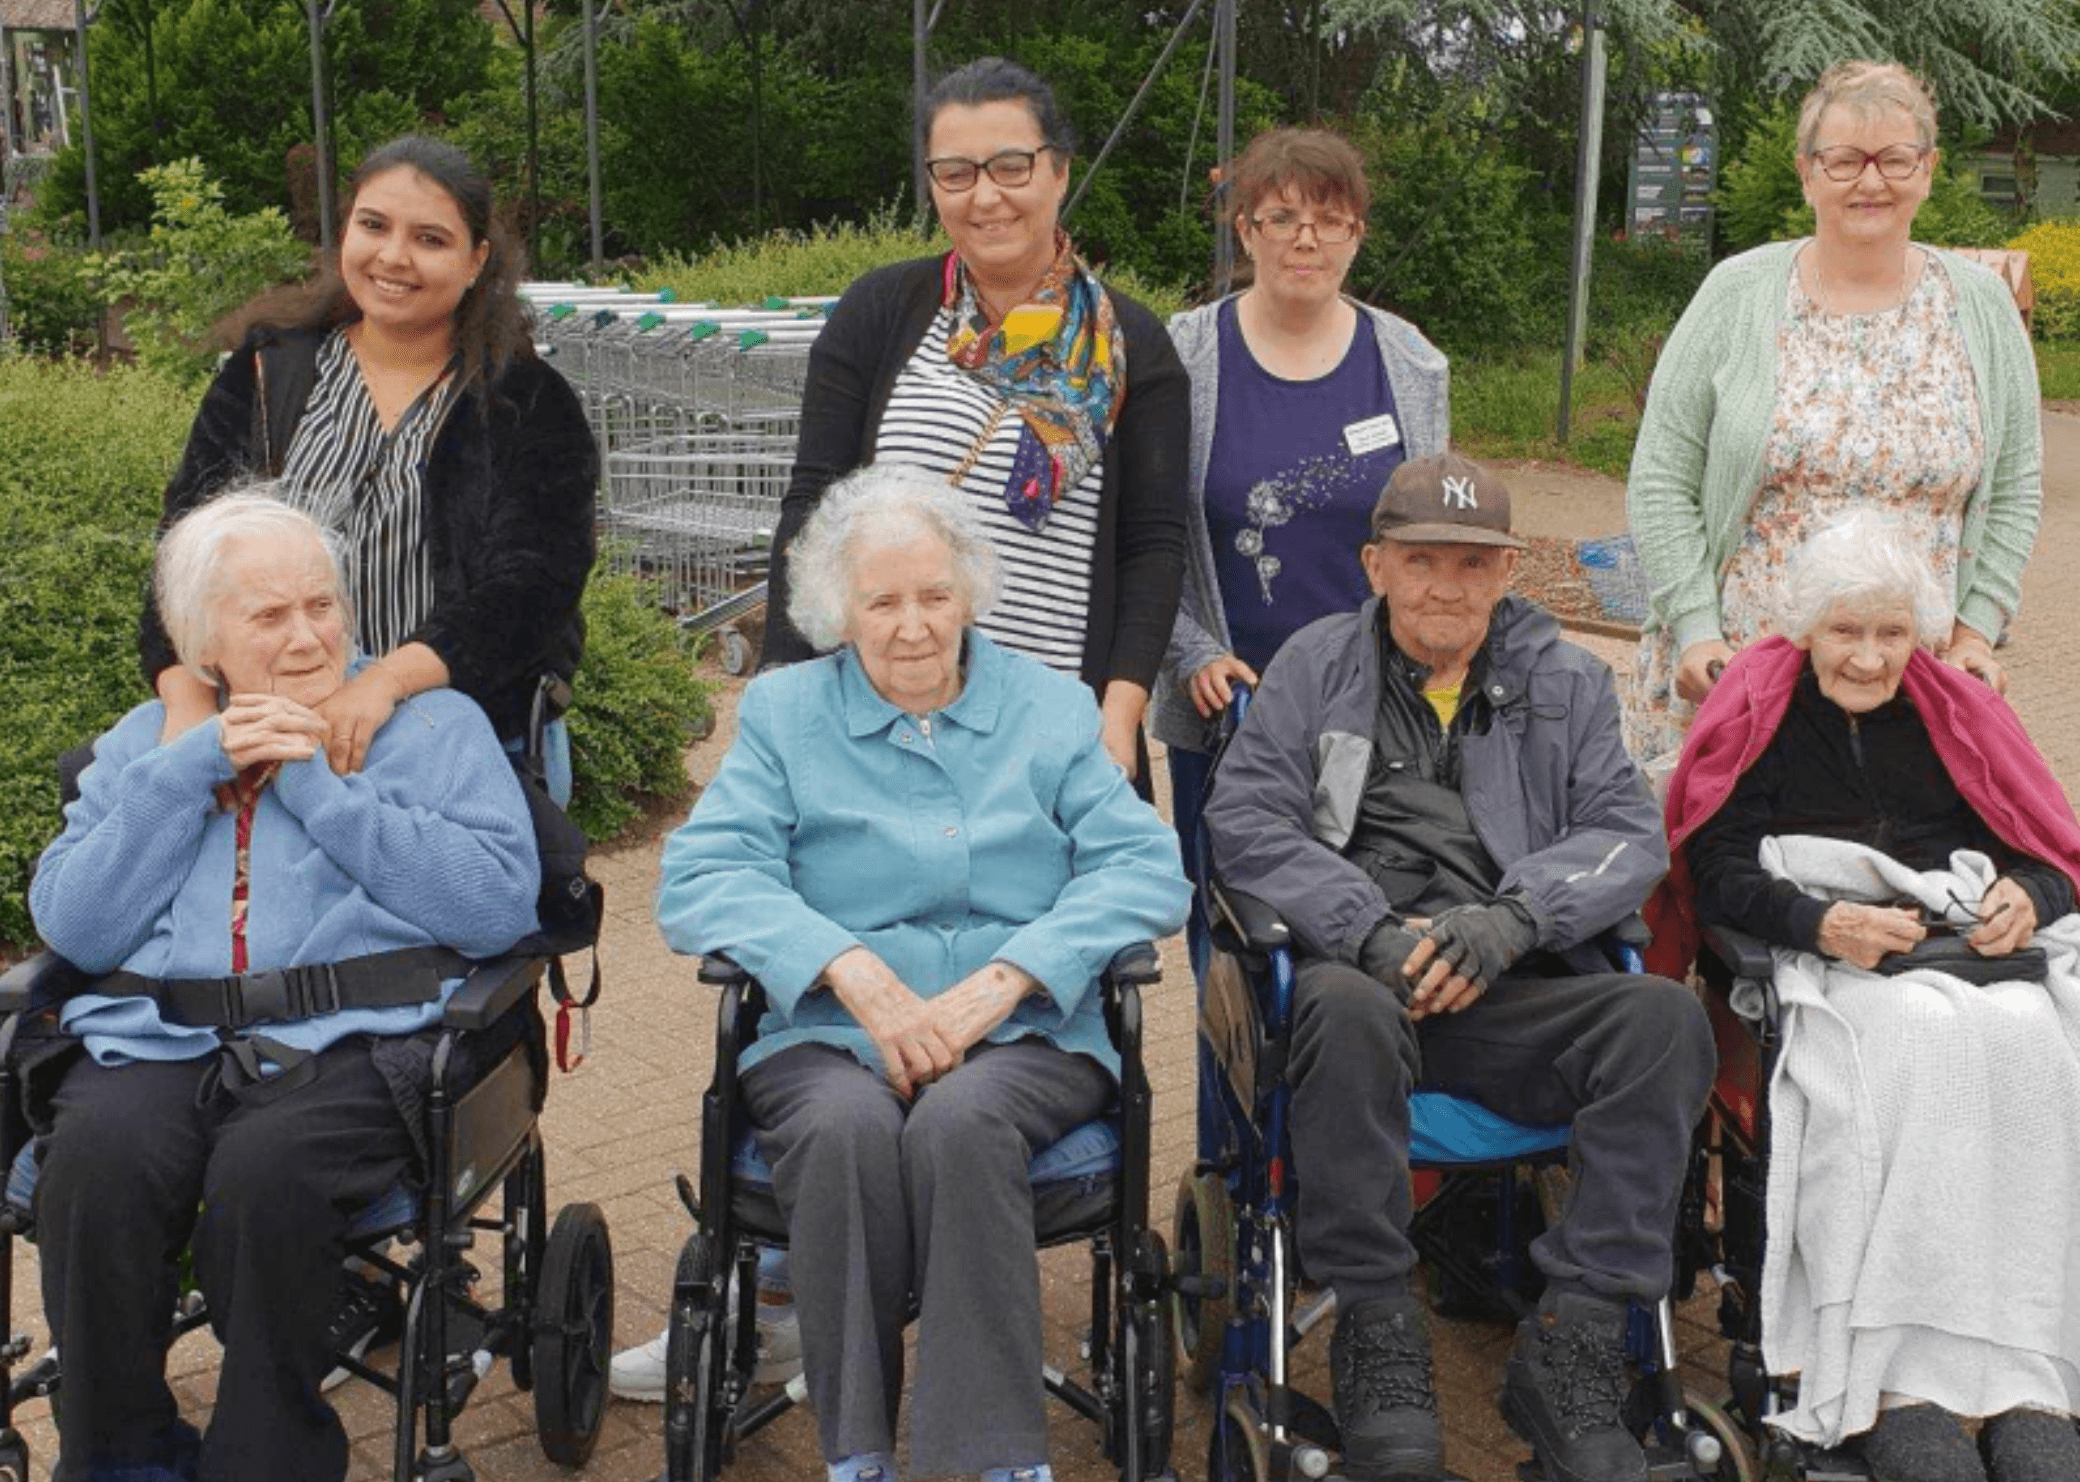 Residents of Meadow View Nursing Home in Witney, Oxfordshire